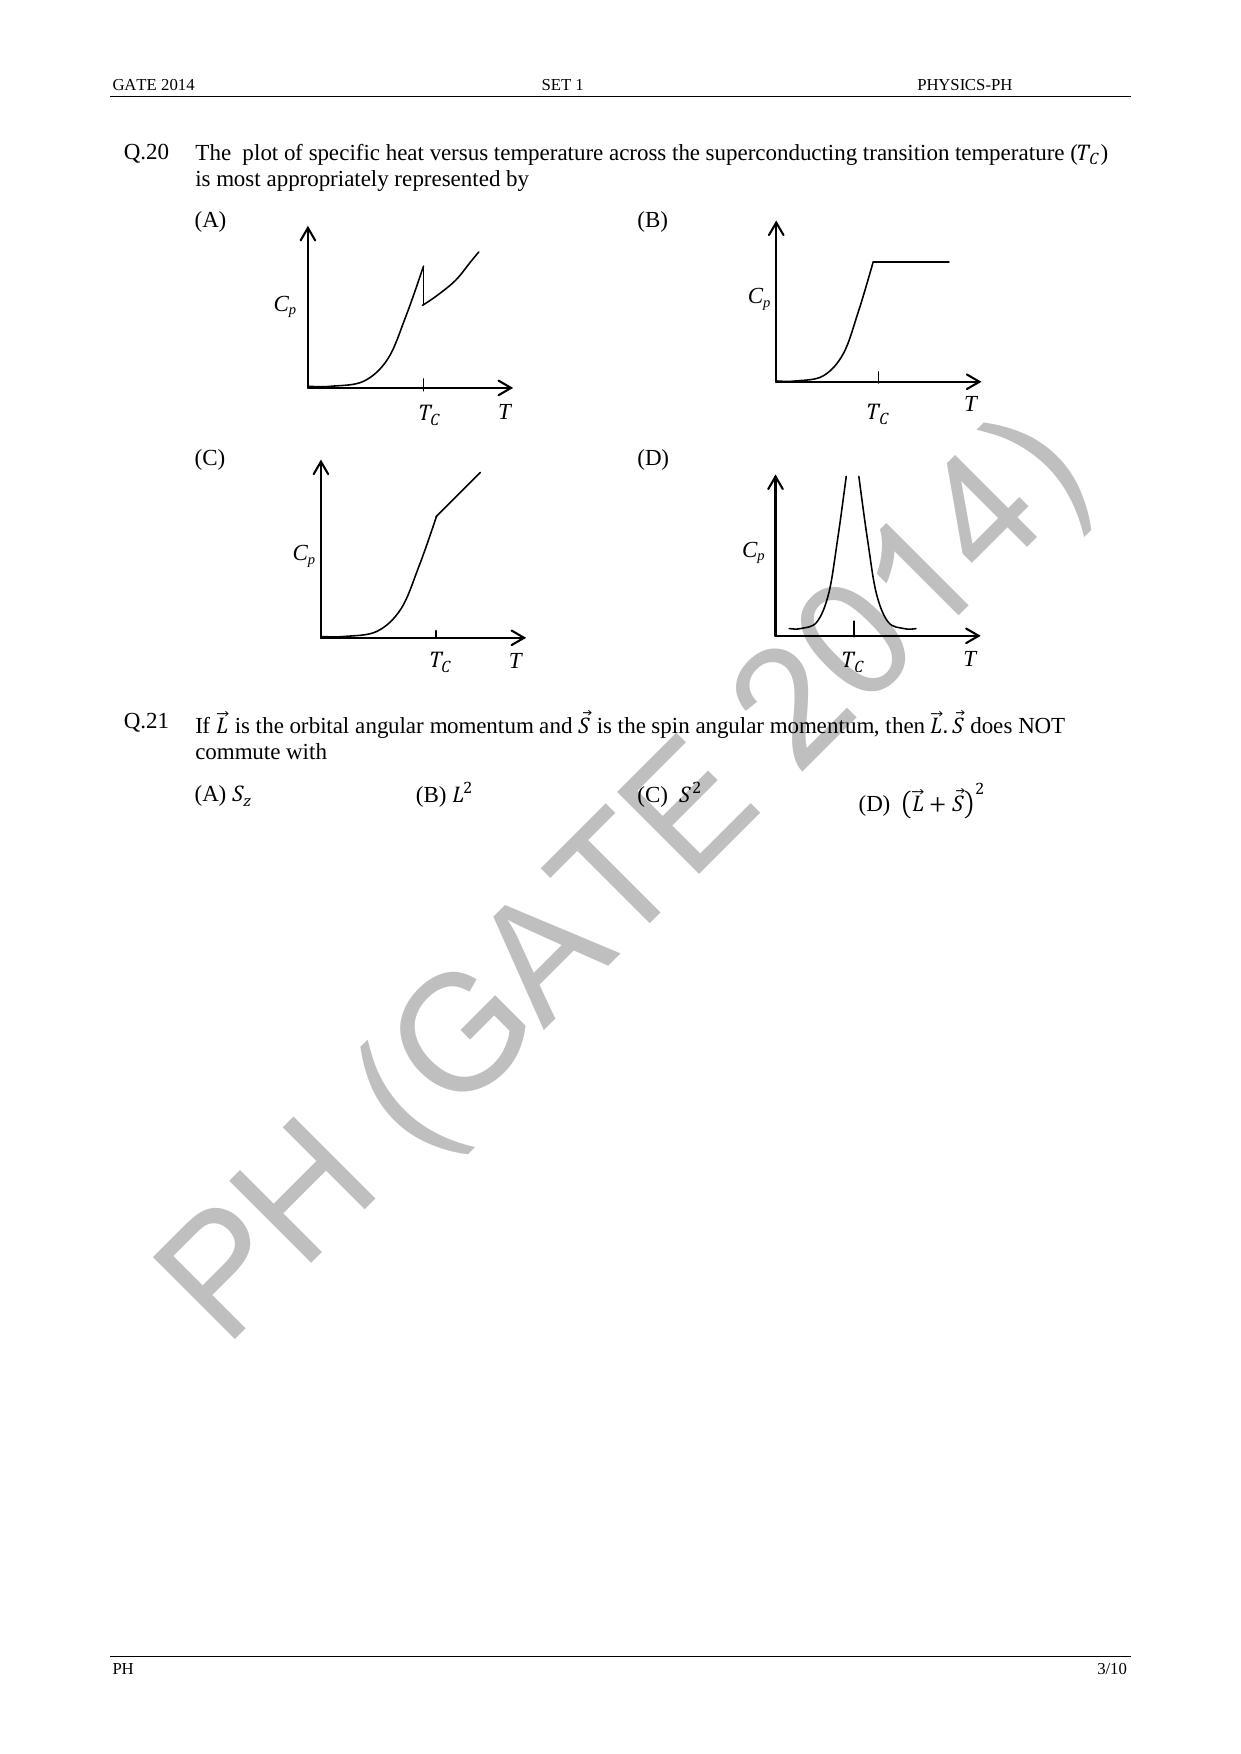 GATE 2014 Physics (PH) Question Paper with Answer Key - Page 10